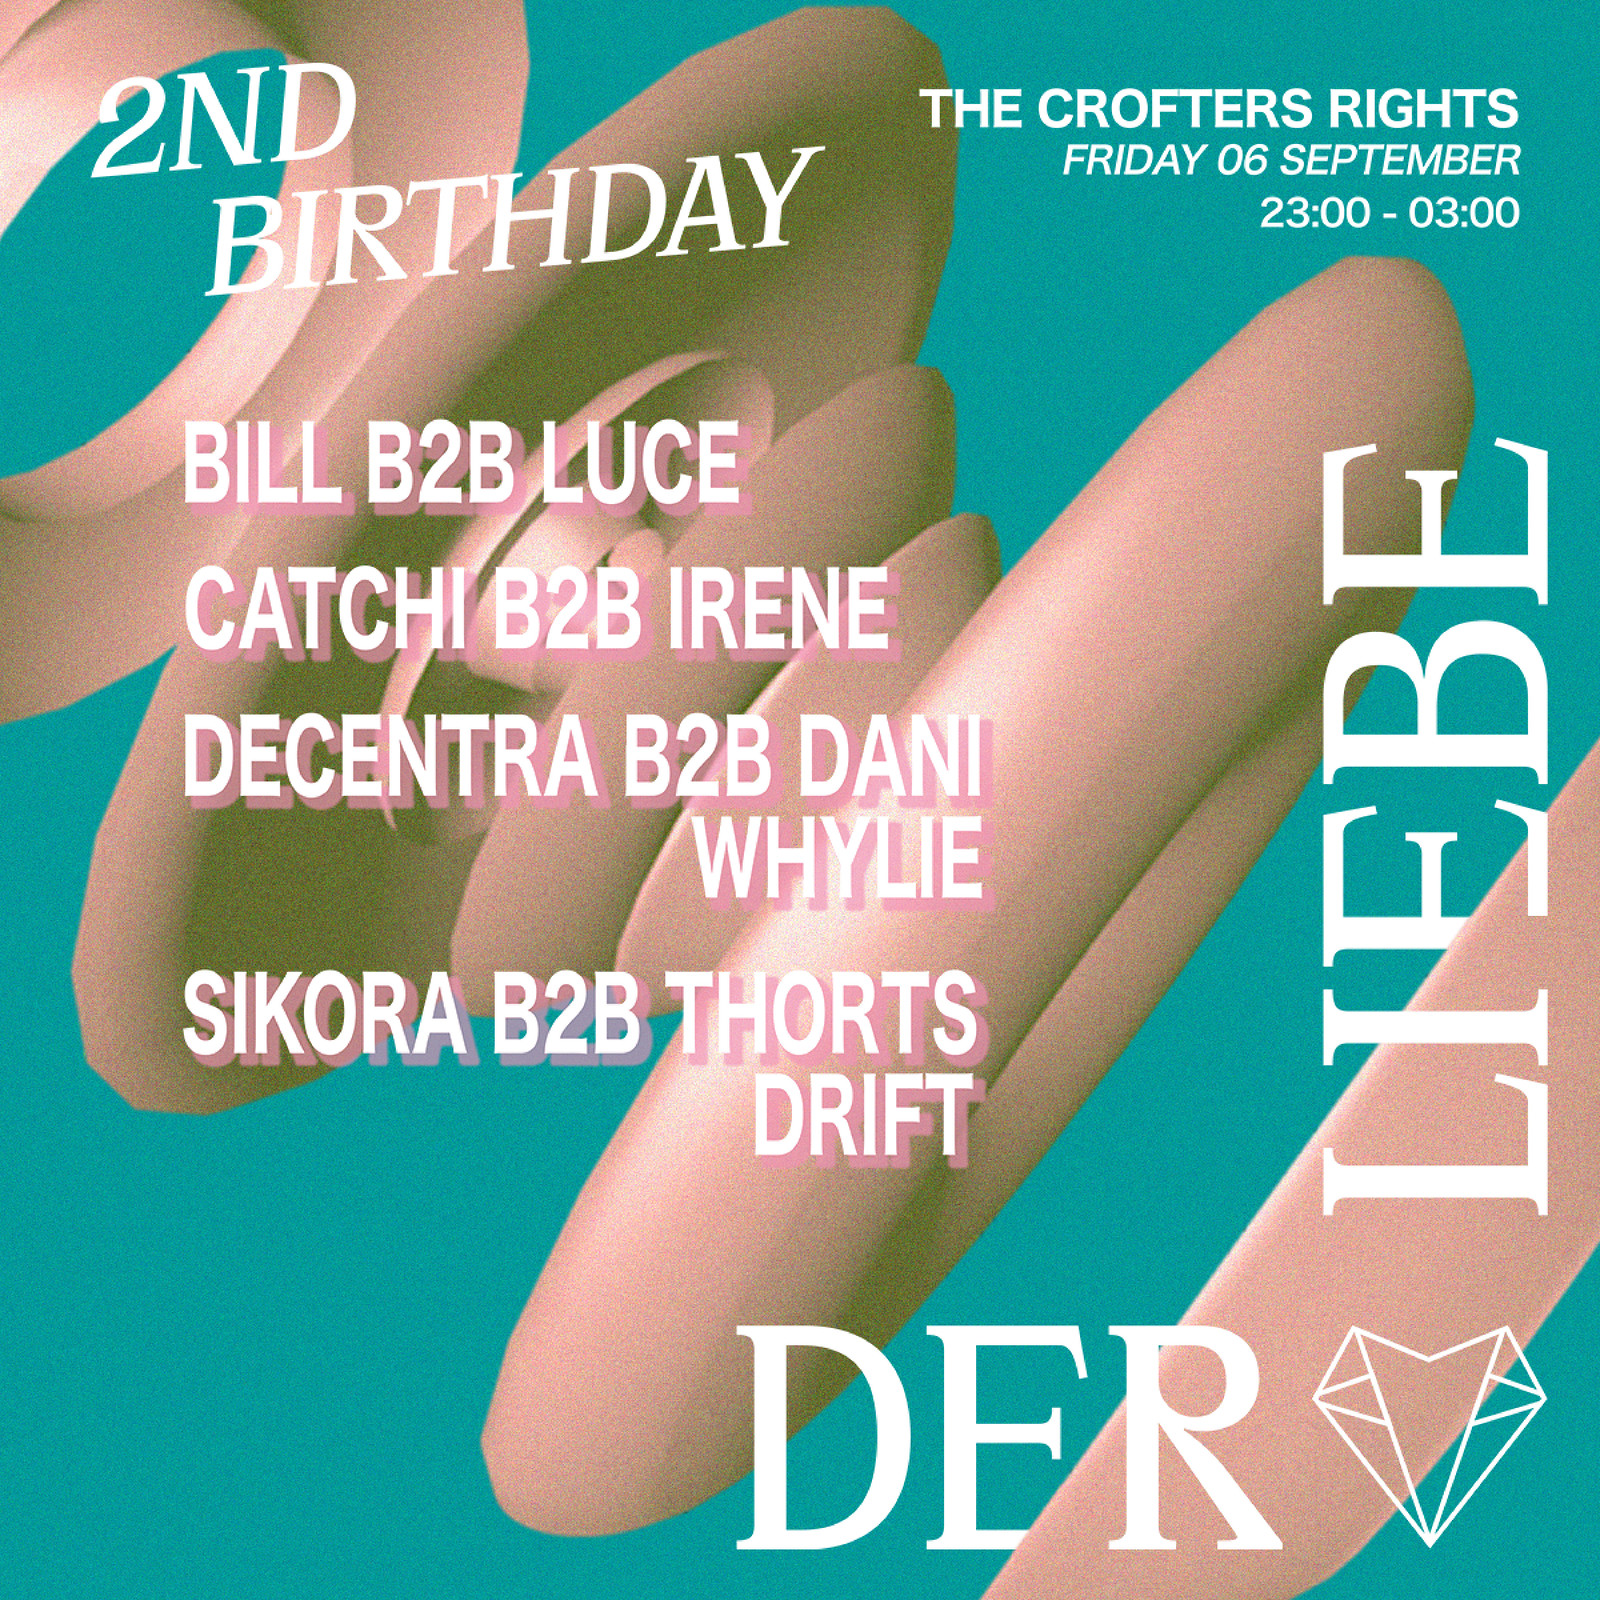 Der Liebe Presents: 2nd Birthday at Crofters Rights